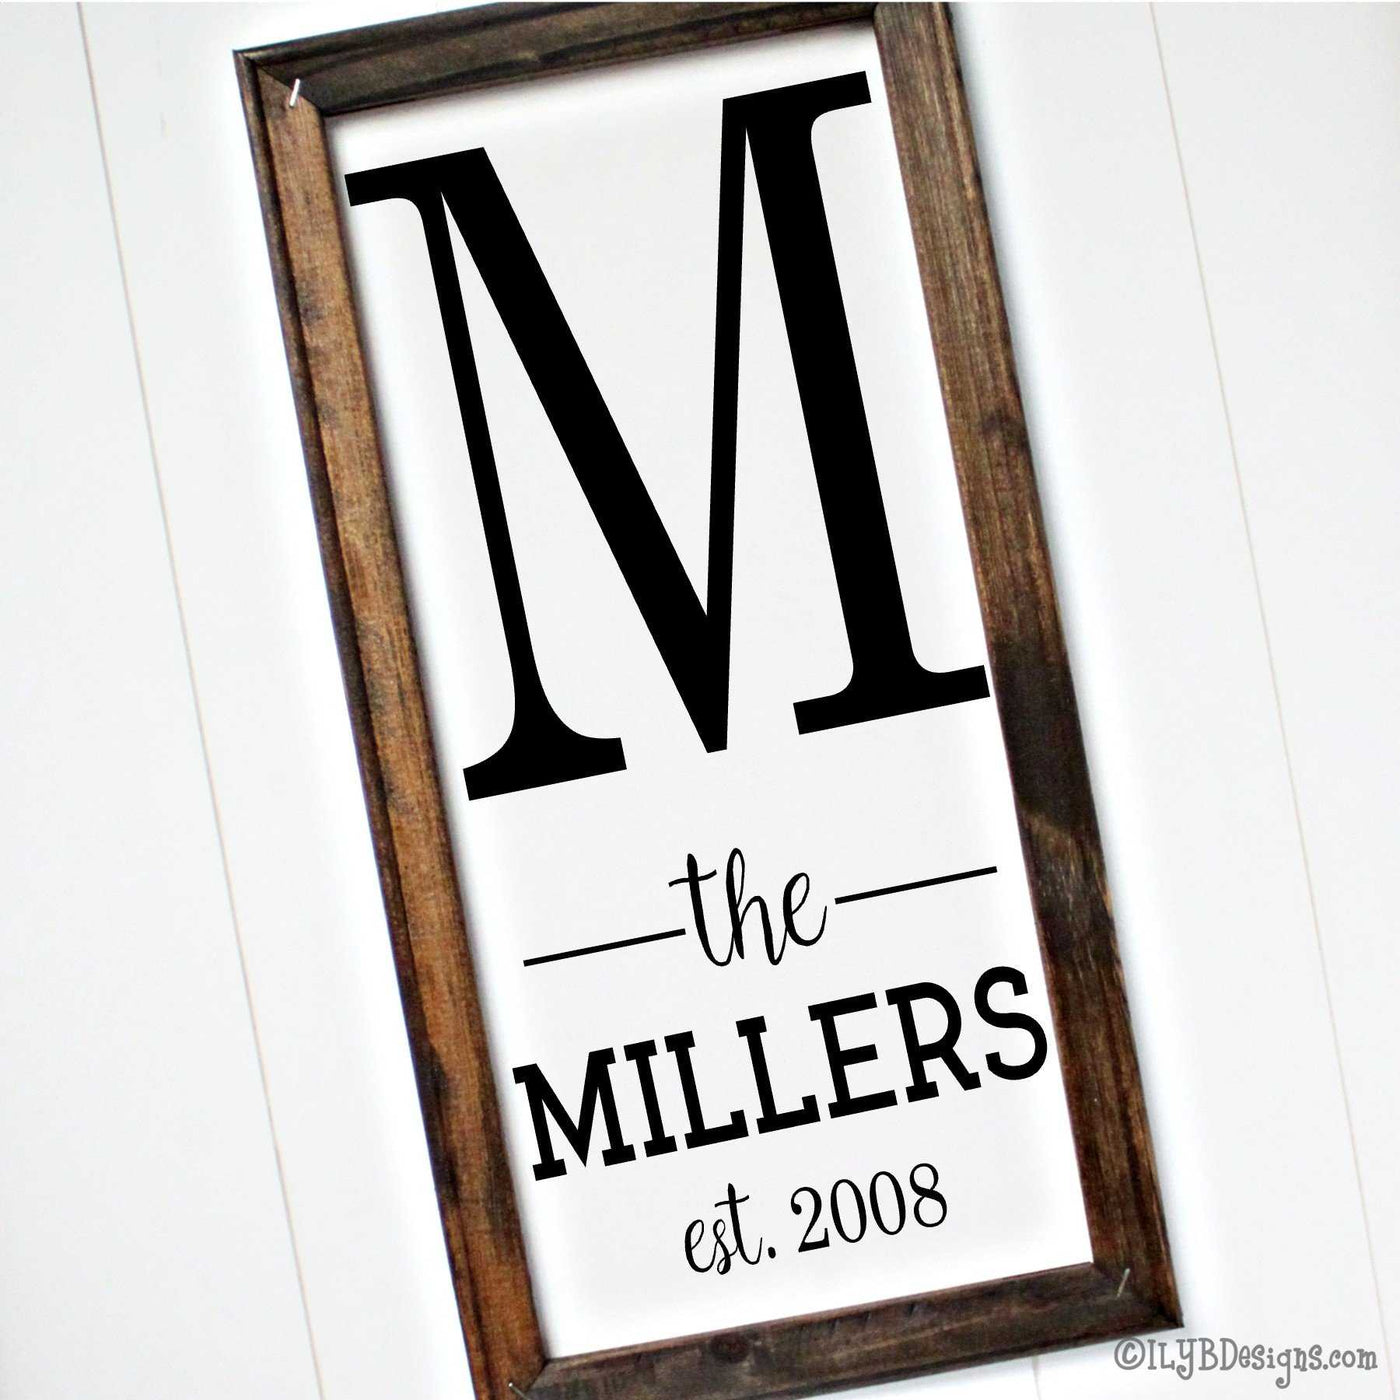 A 10"x20" dark walnut stained frame on a white canvas with a black design placed vertically. The design is a large printed initial letter on top with the word "the" placed in between 2 lines followed by a last name in a print font followed by an established year underneath.